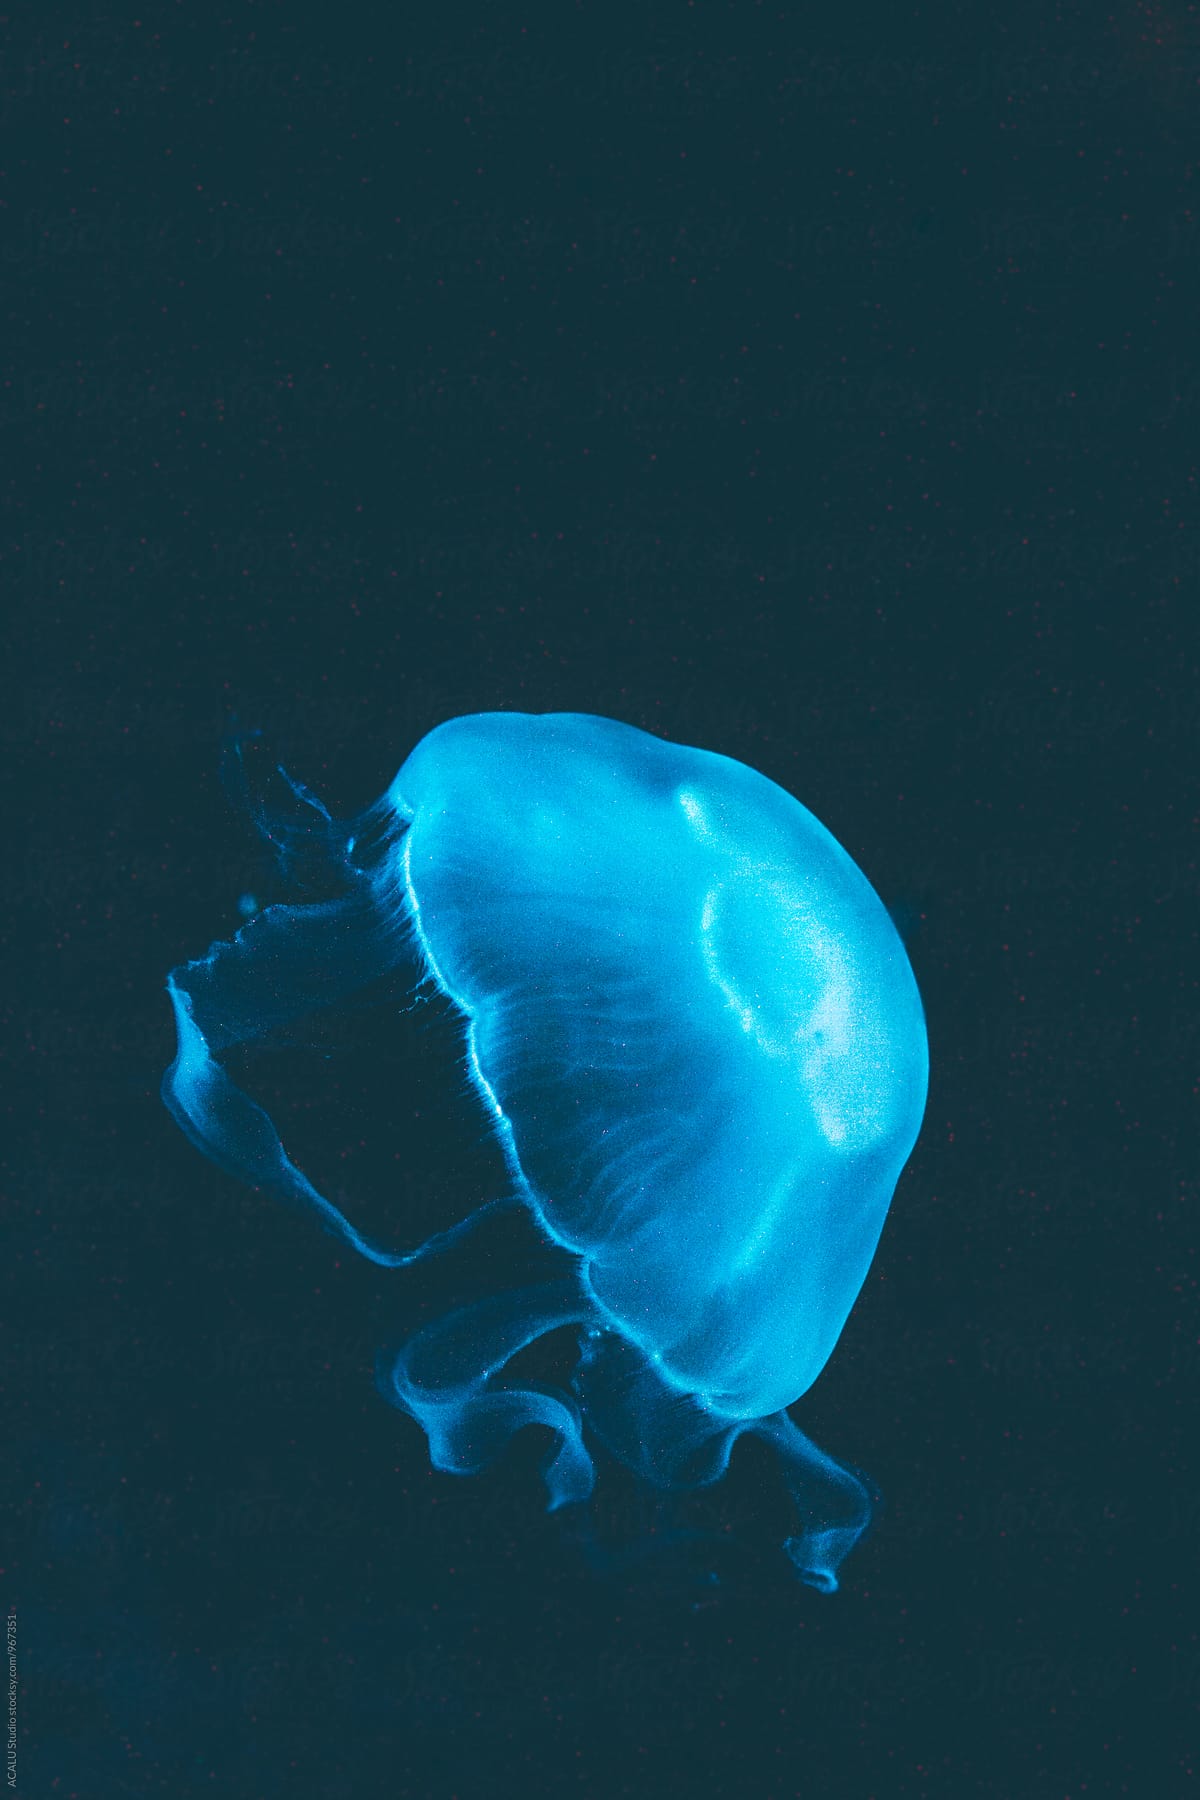 Fluorescent blue jellyfish floating in the water